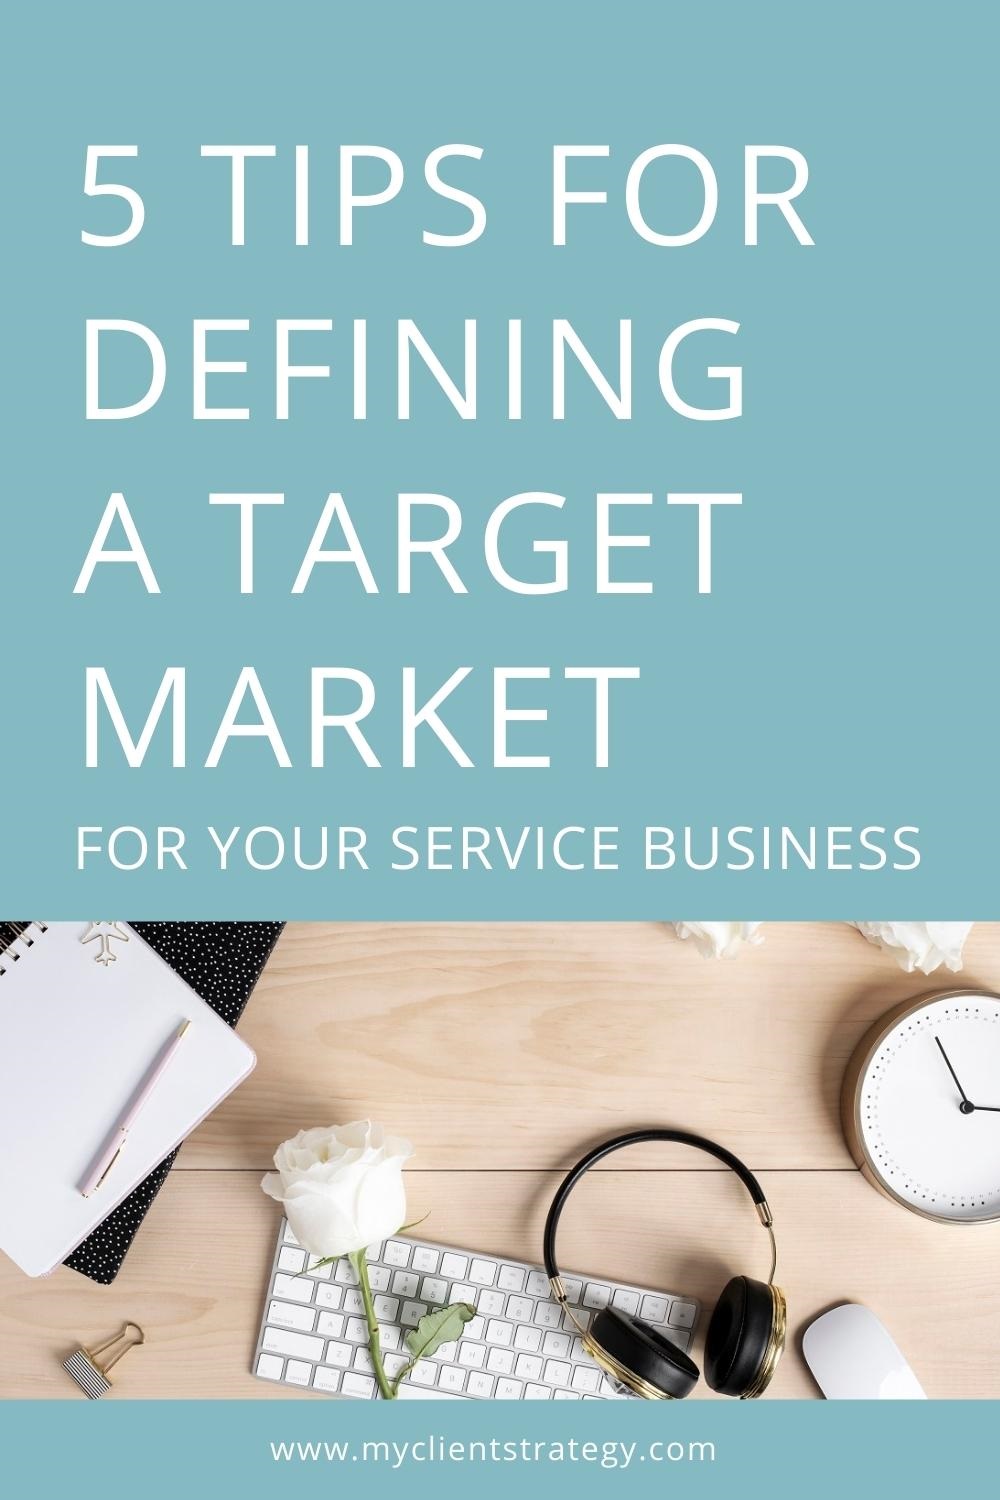 5 Tips for defining a target market for your service business